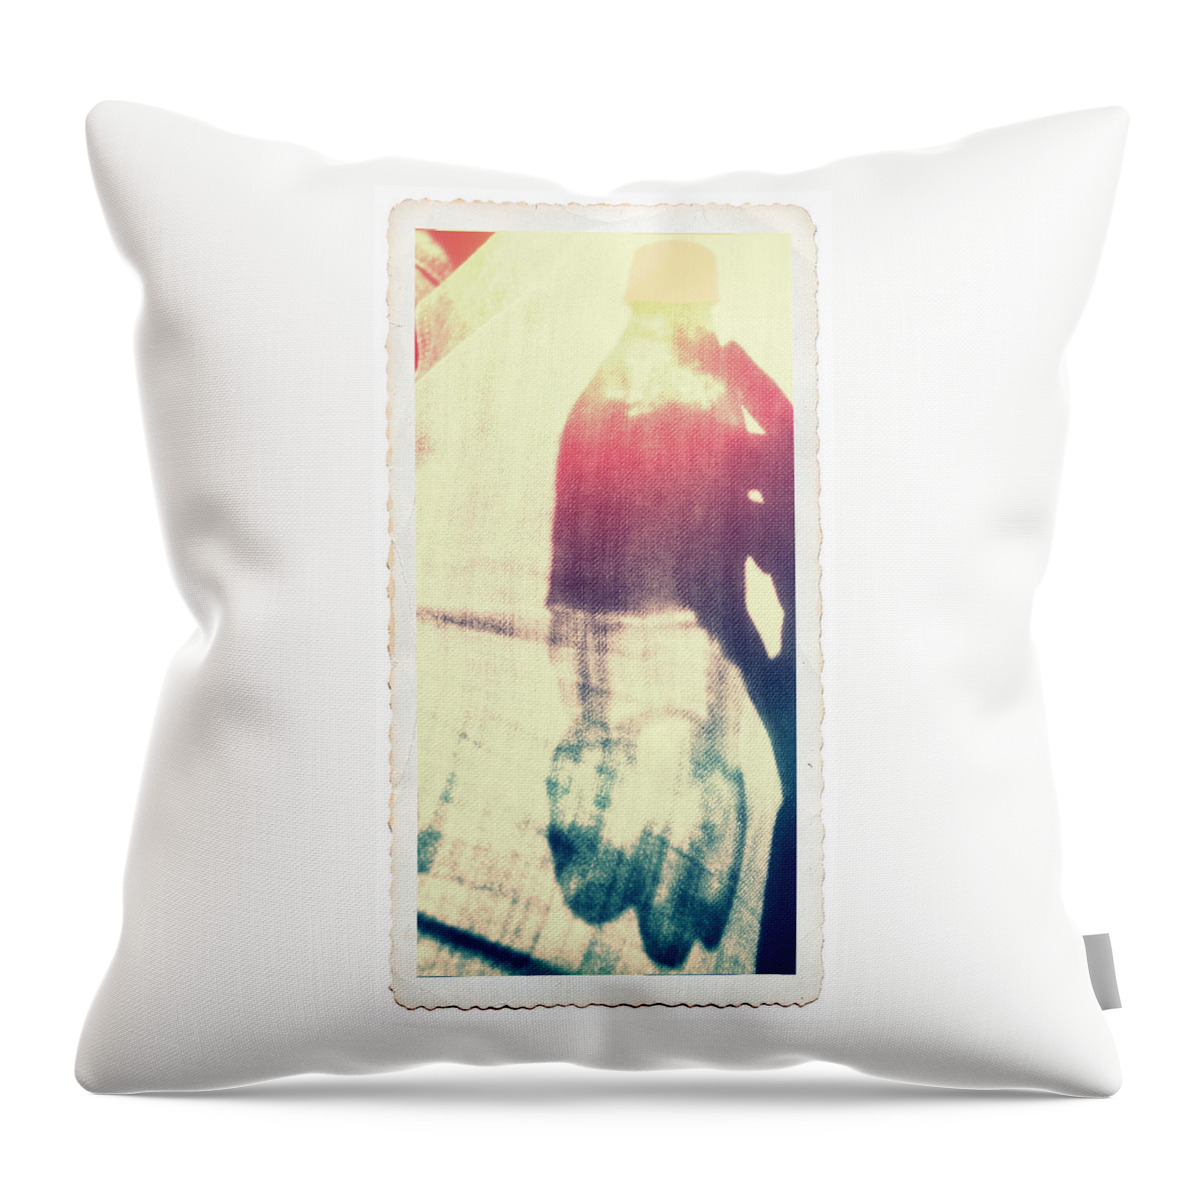 Coca-cola Throw Pillow featuring the photograph Choose Happiness by Spikey Mouse Photography